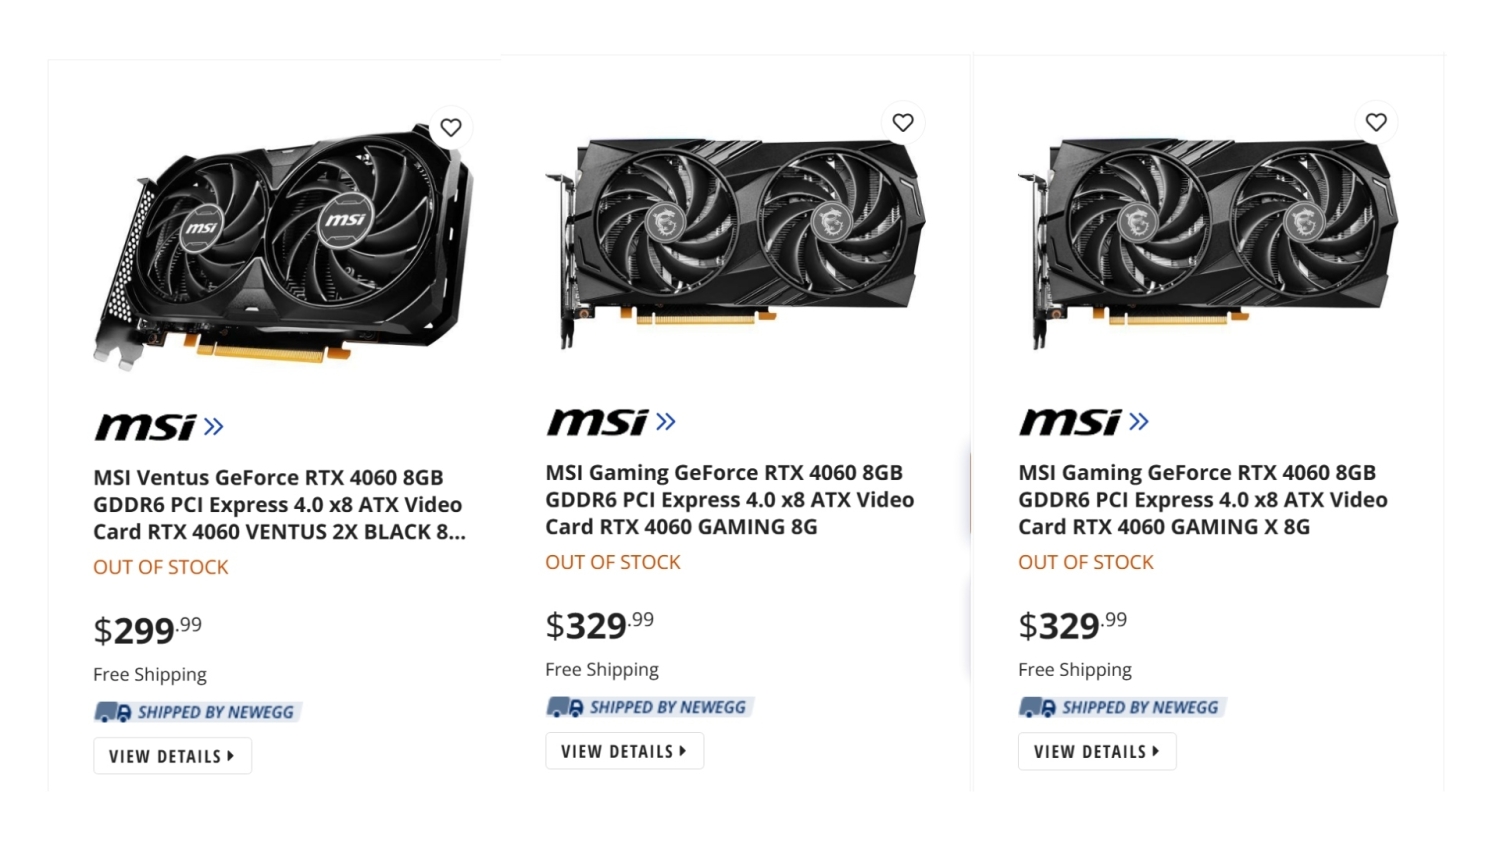 TweakTown Enlarged Image - GeForce RTX 4060 pricing for MSI cards has appeared over at Newegg.